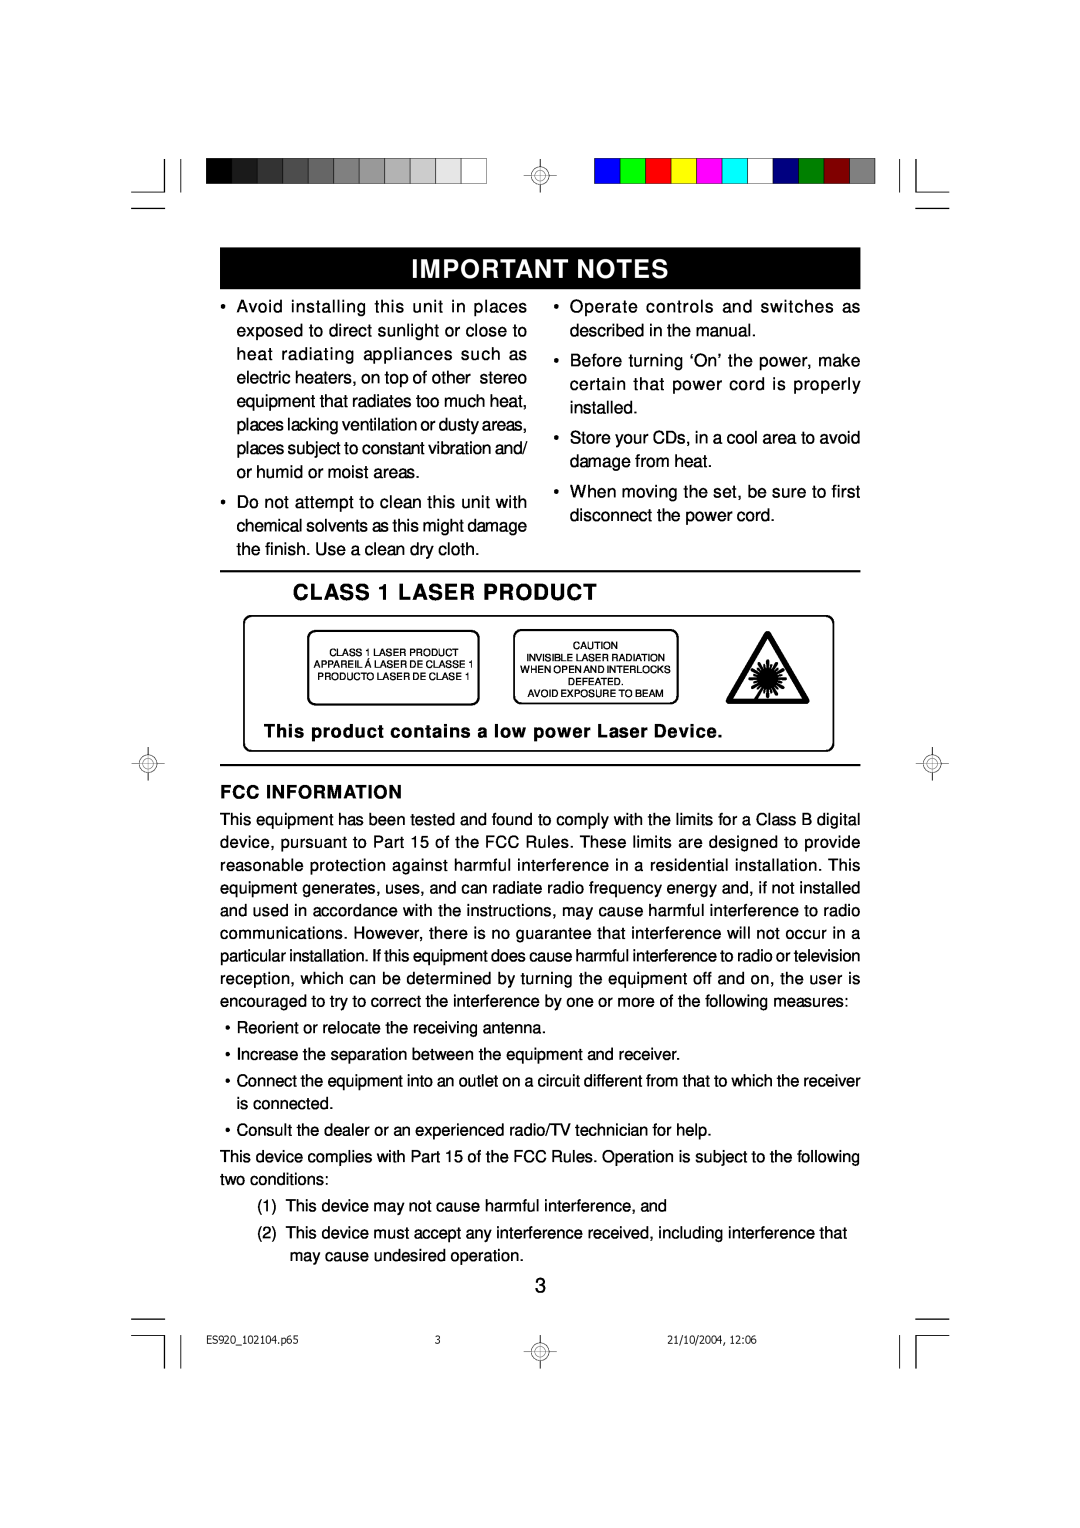 Emerson ES920 owner manual Important Notes, CLASS 1 LASER PRODUCT 